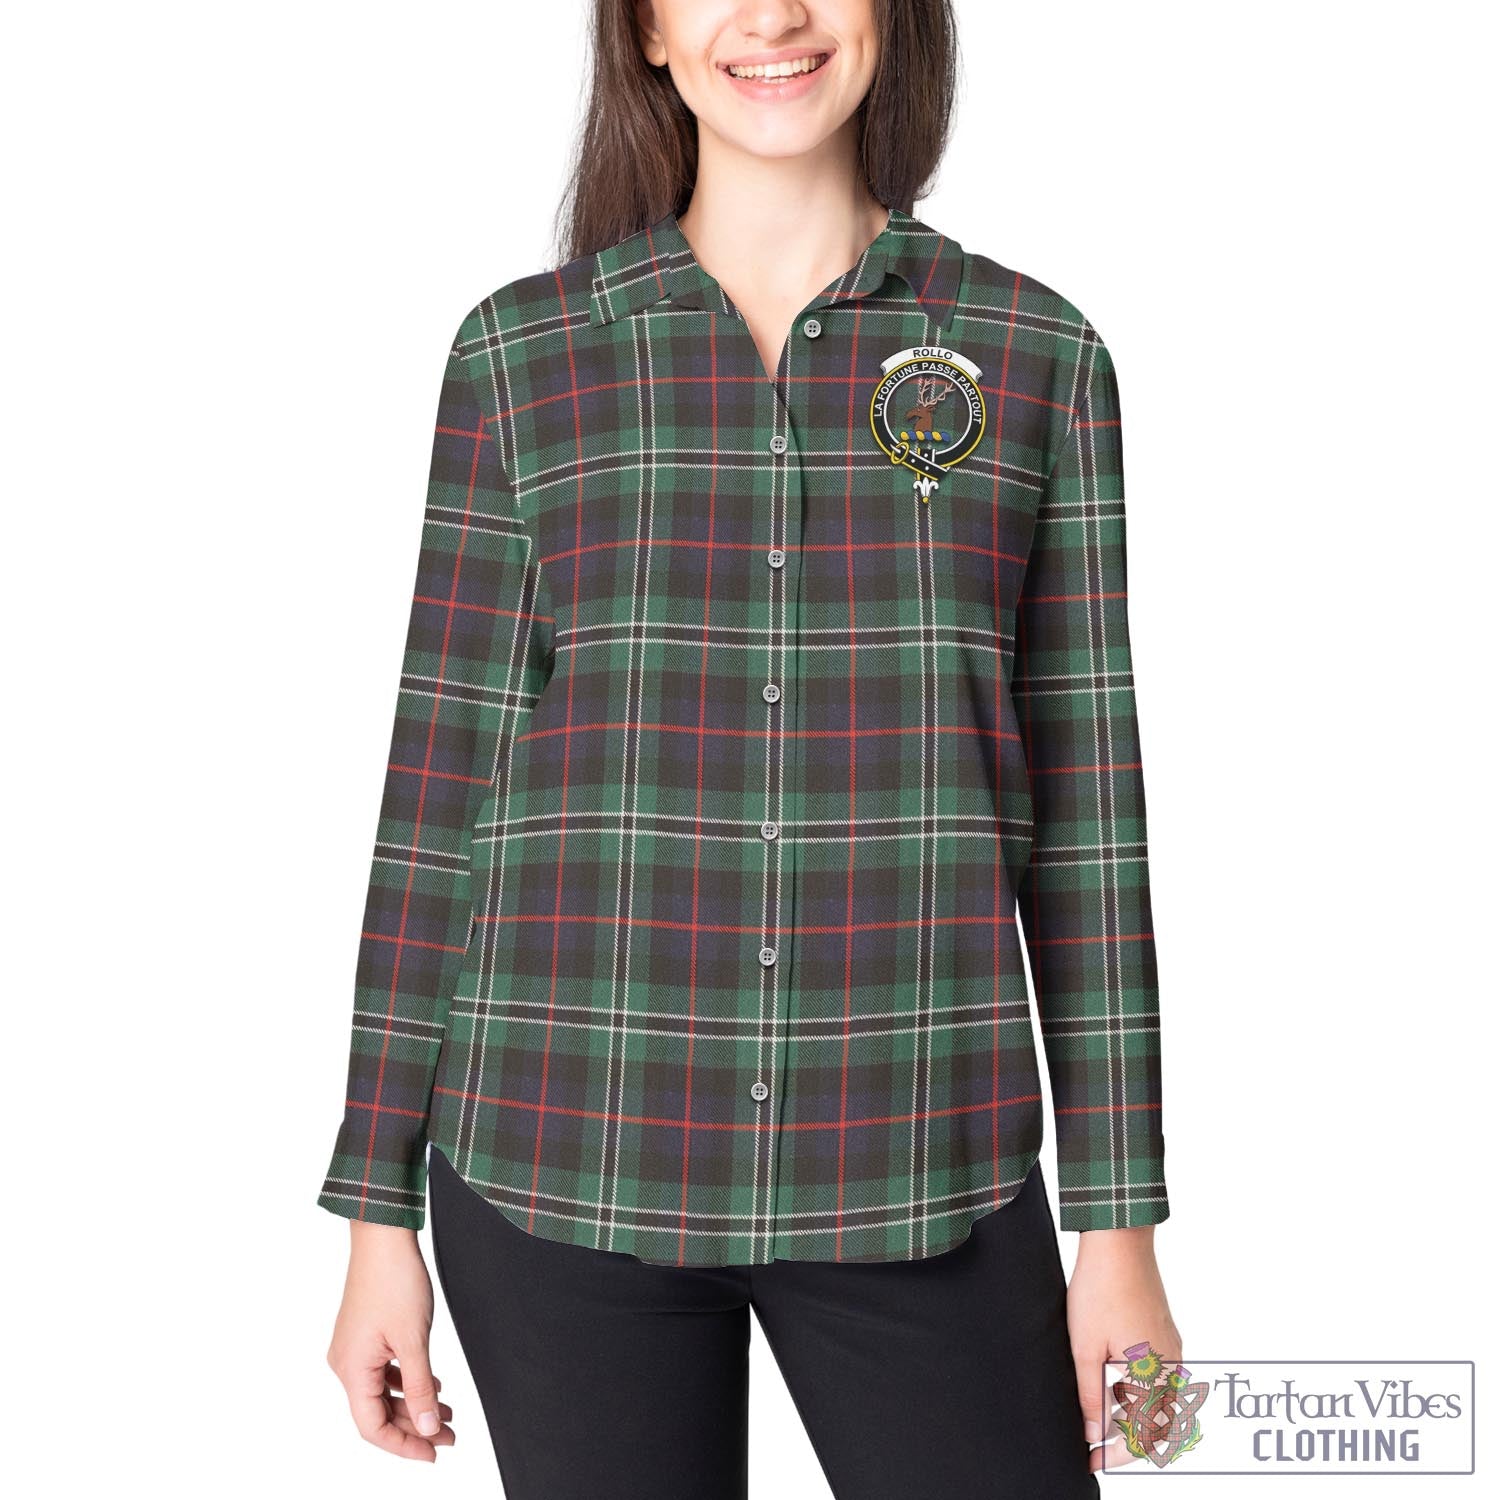 Tartan Vibes Clothing Rollo Hunting Tartan Womens Casual Shirt with Family Crest